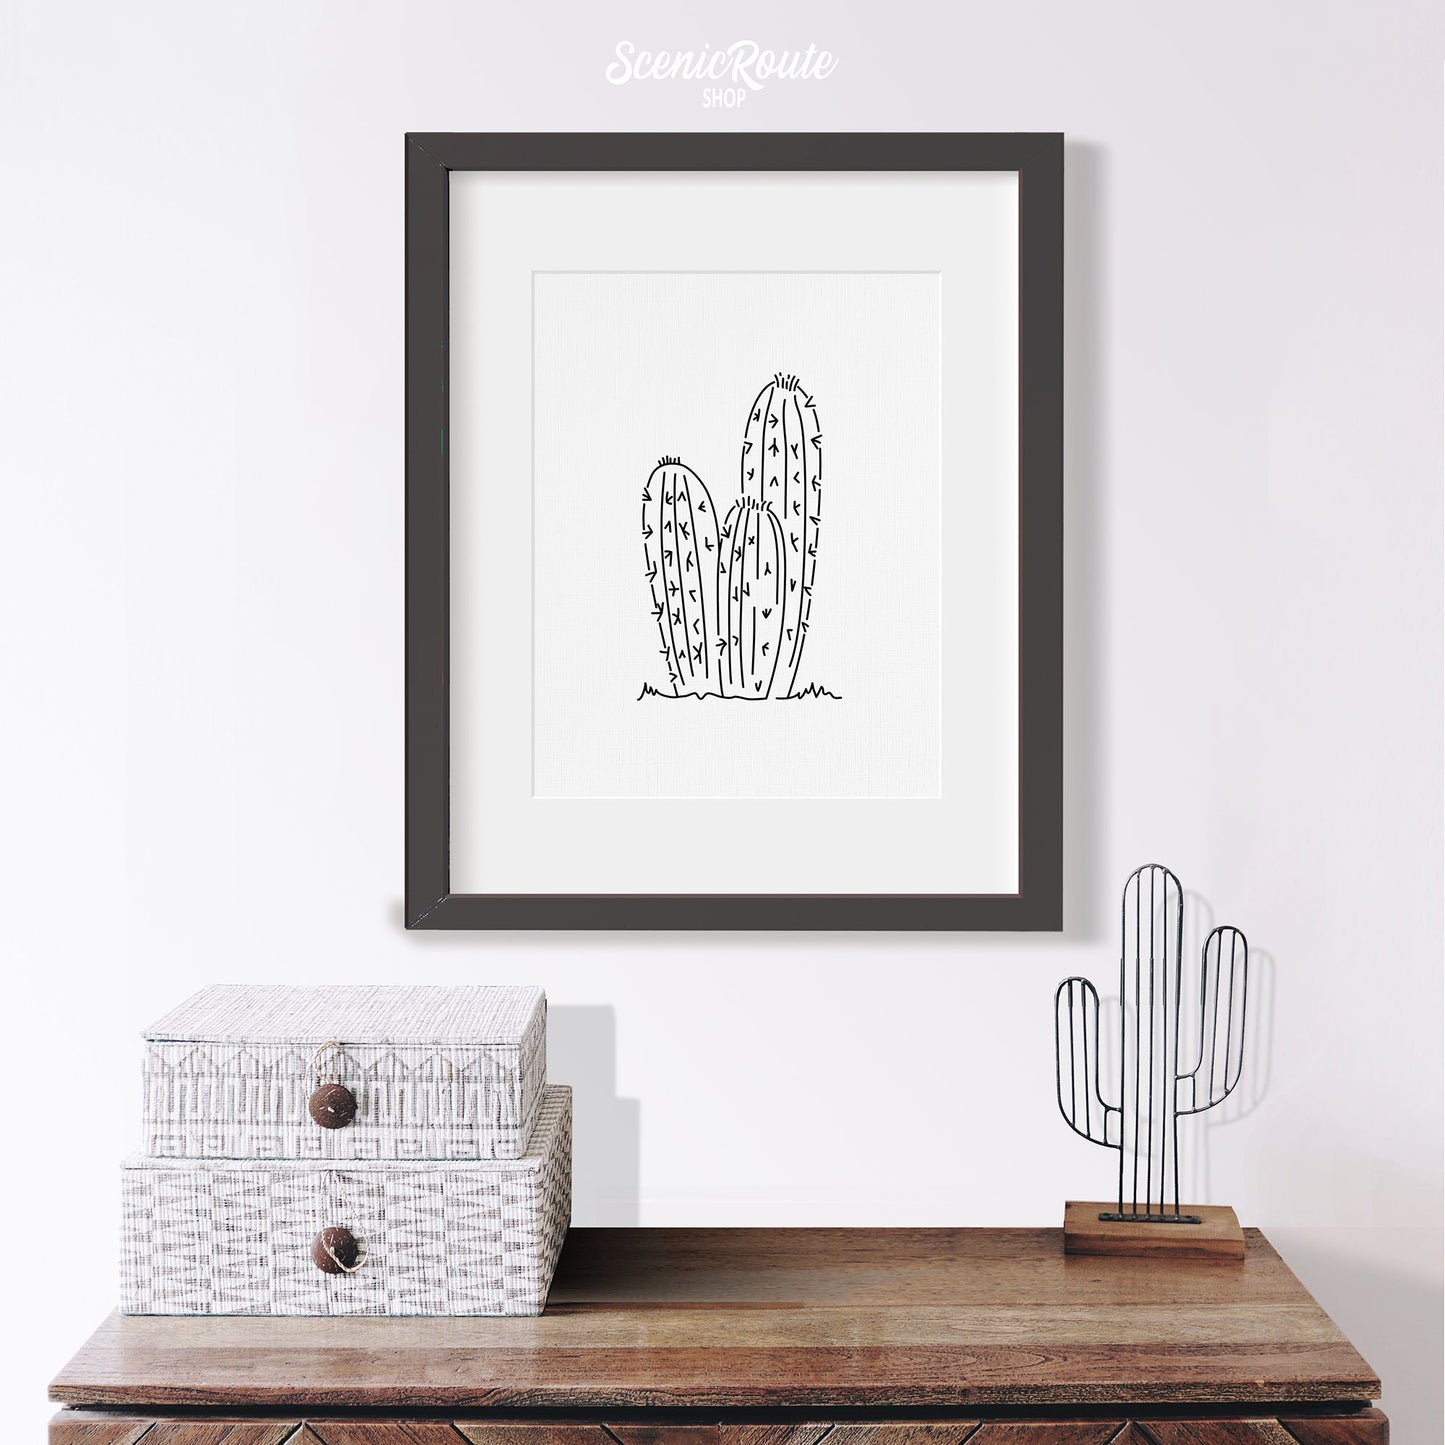 A framed line art drawing of a Torch Cactus hanging above a table with cactus figurine